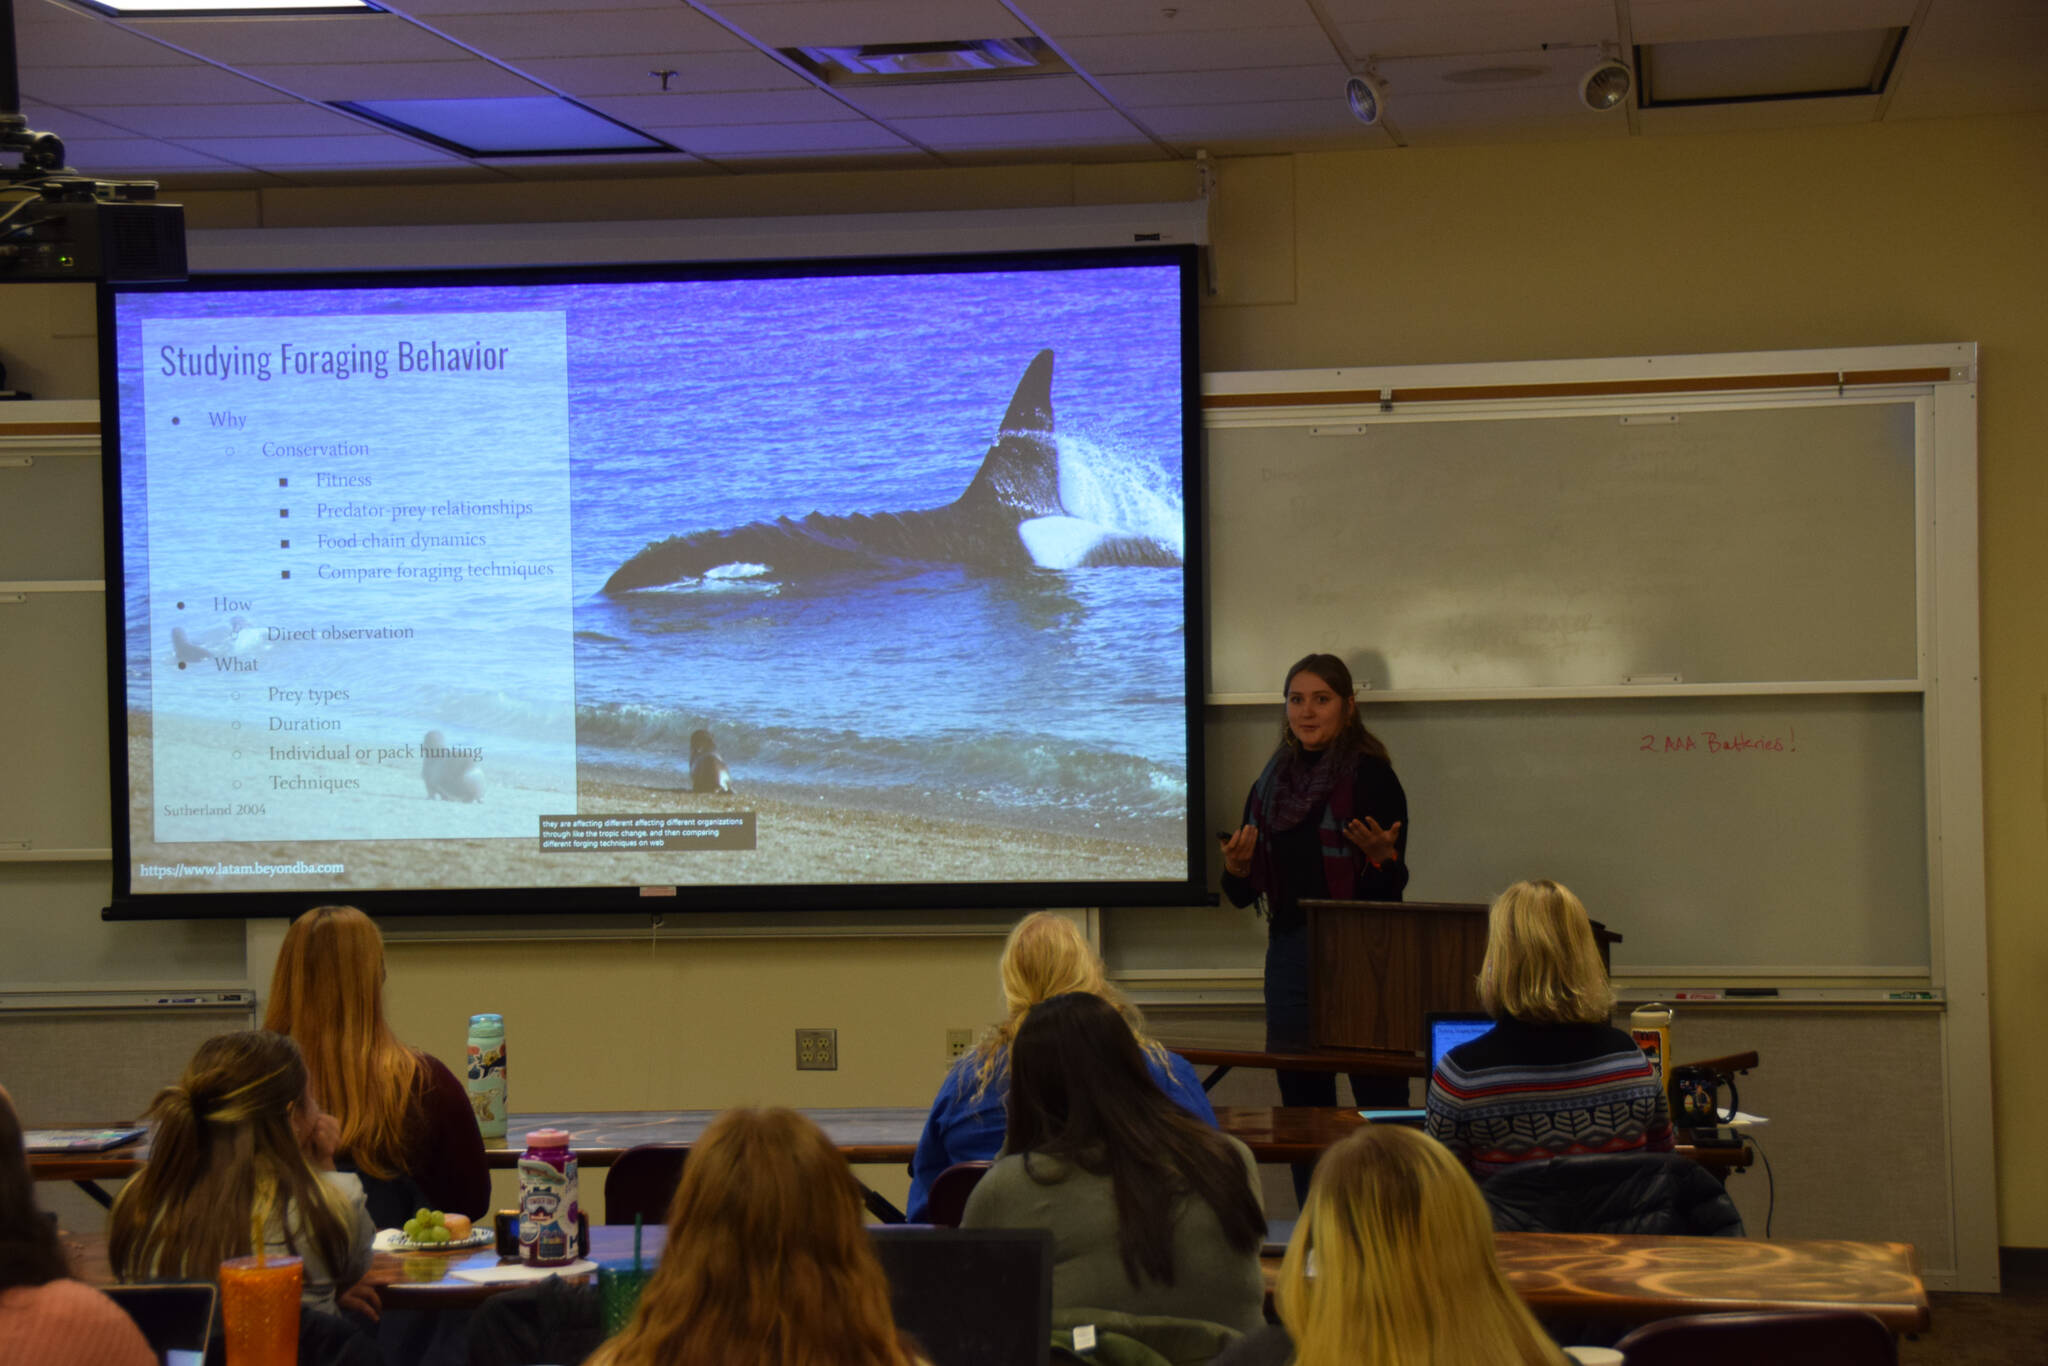 Jamie Hoy, a Montana State University student who is participating in the Kachemak Bay Campus of Kenai Peninsula College, University of Alaska Anchorage’s, “Semester by the Bay” program, gives a presentation on orca whales at the Marine Mammal Biology Symposium on Friday, Nov. 4 in Homer. (Photo by Charlie Menke / Homer News)